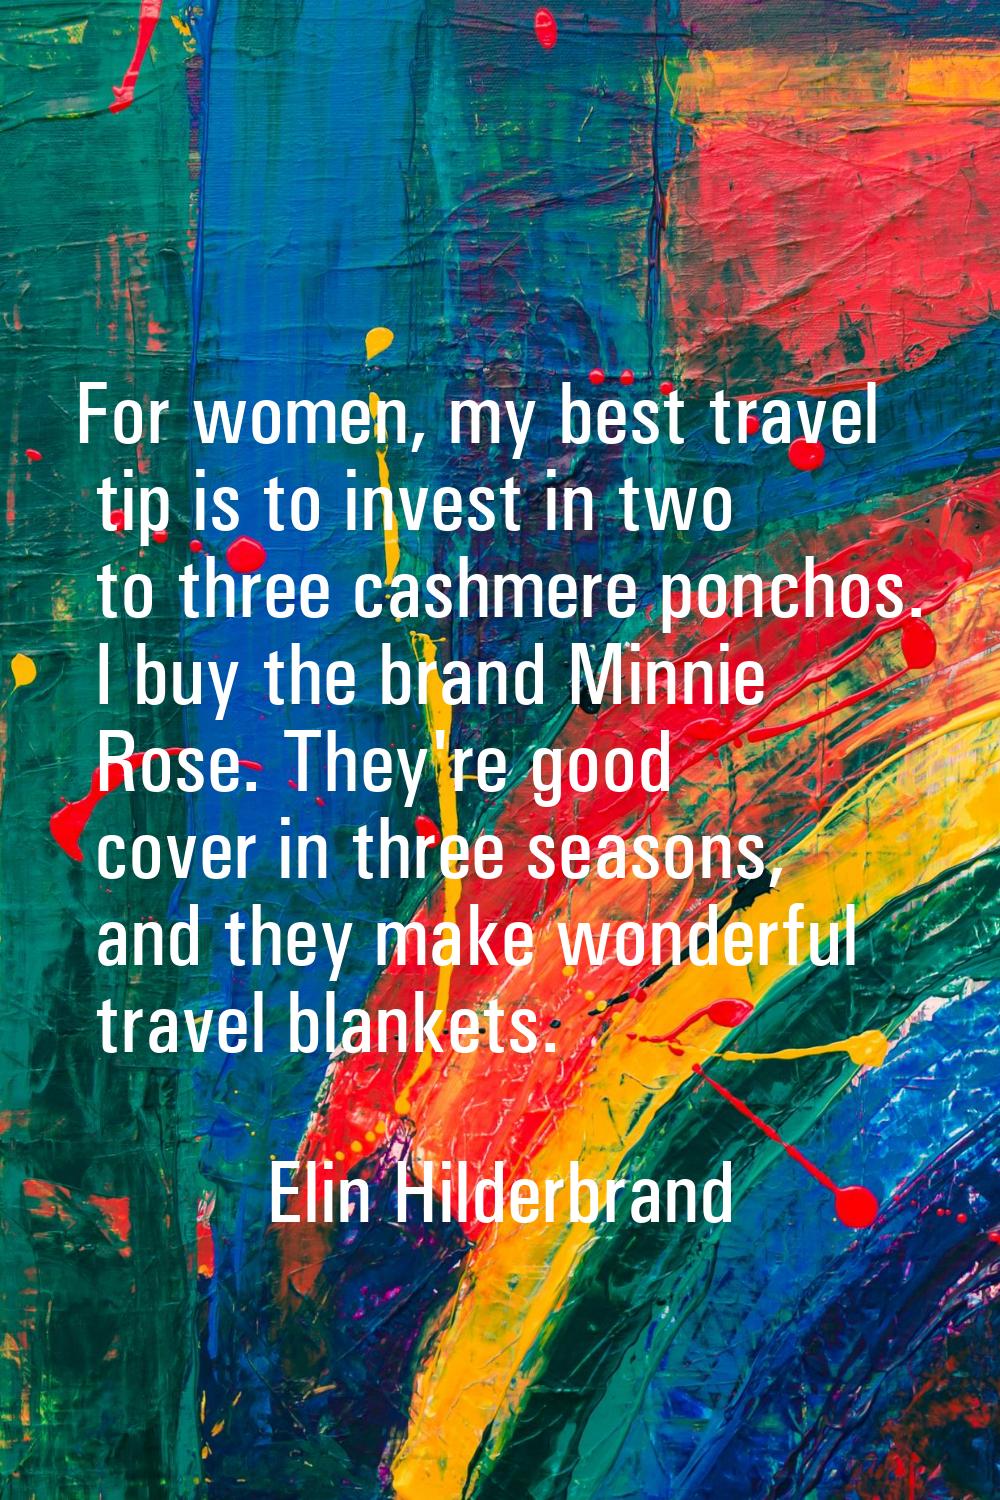 For women, my best travel tip is to invest in two to three cashmere ponchos. I buy the brand Minnie